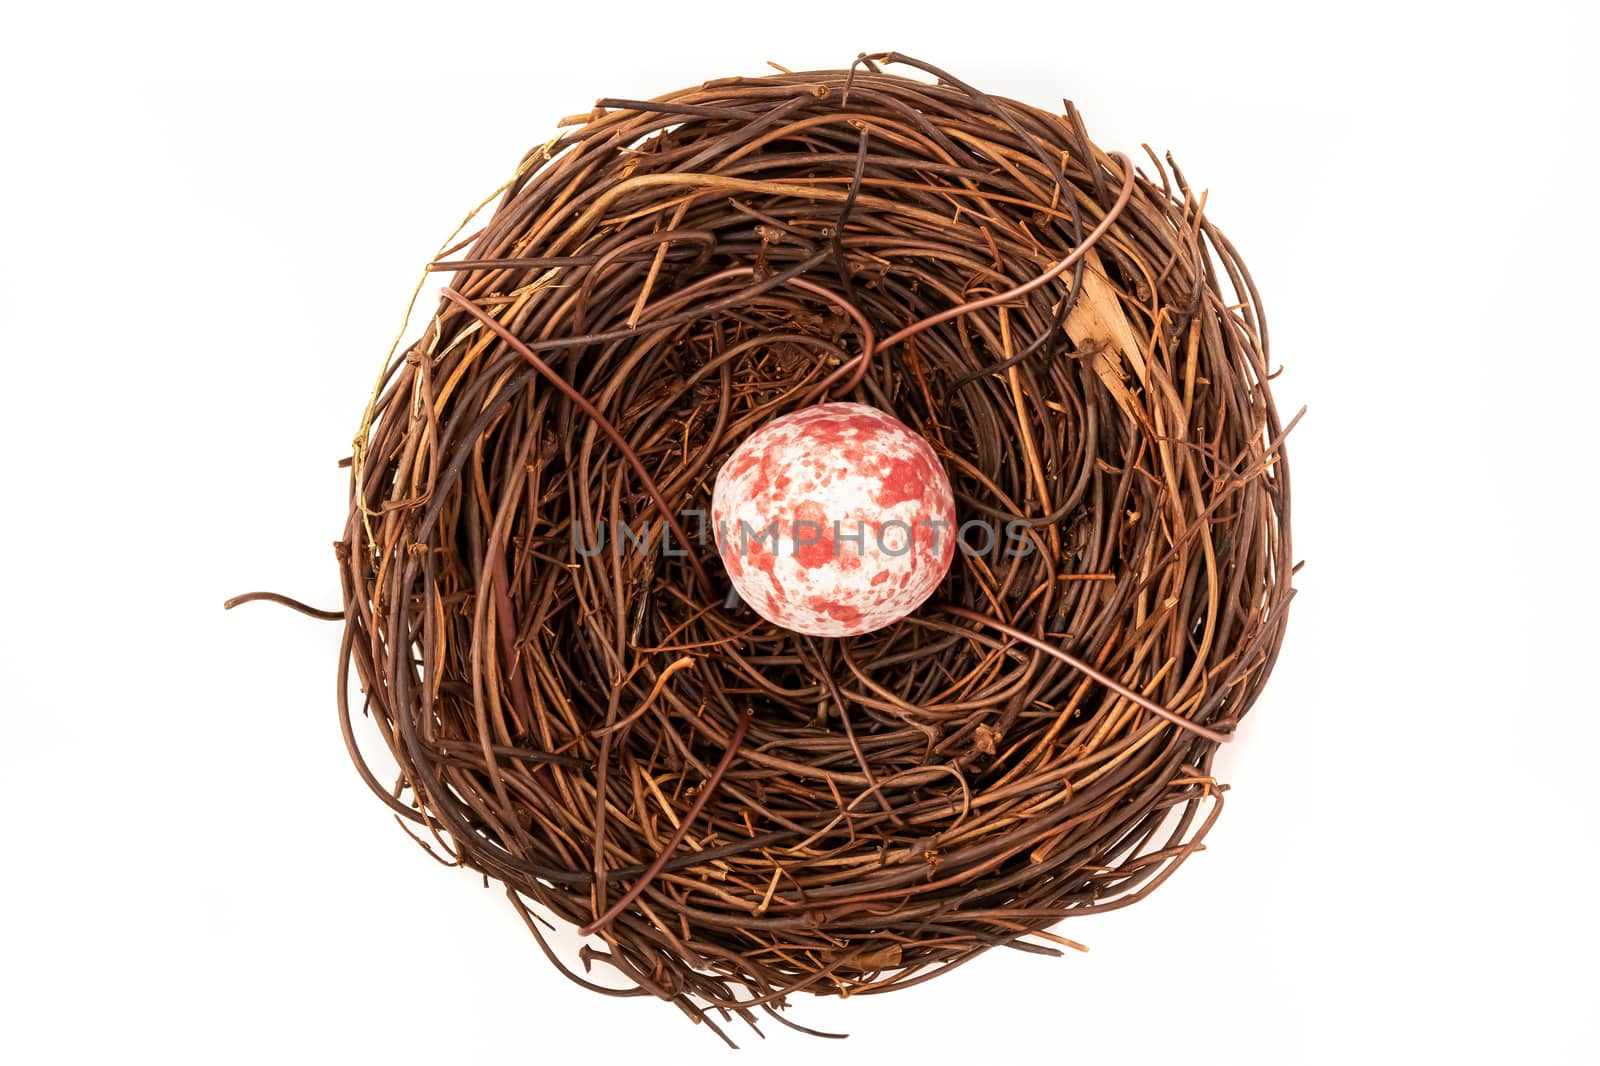 A bird nest with egg by Nawoot